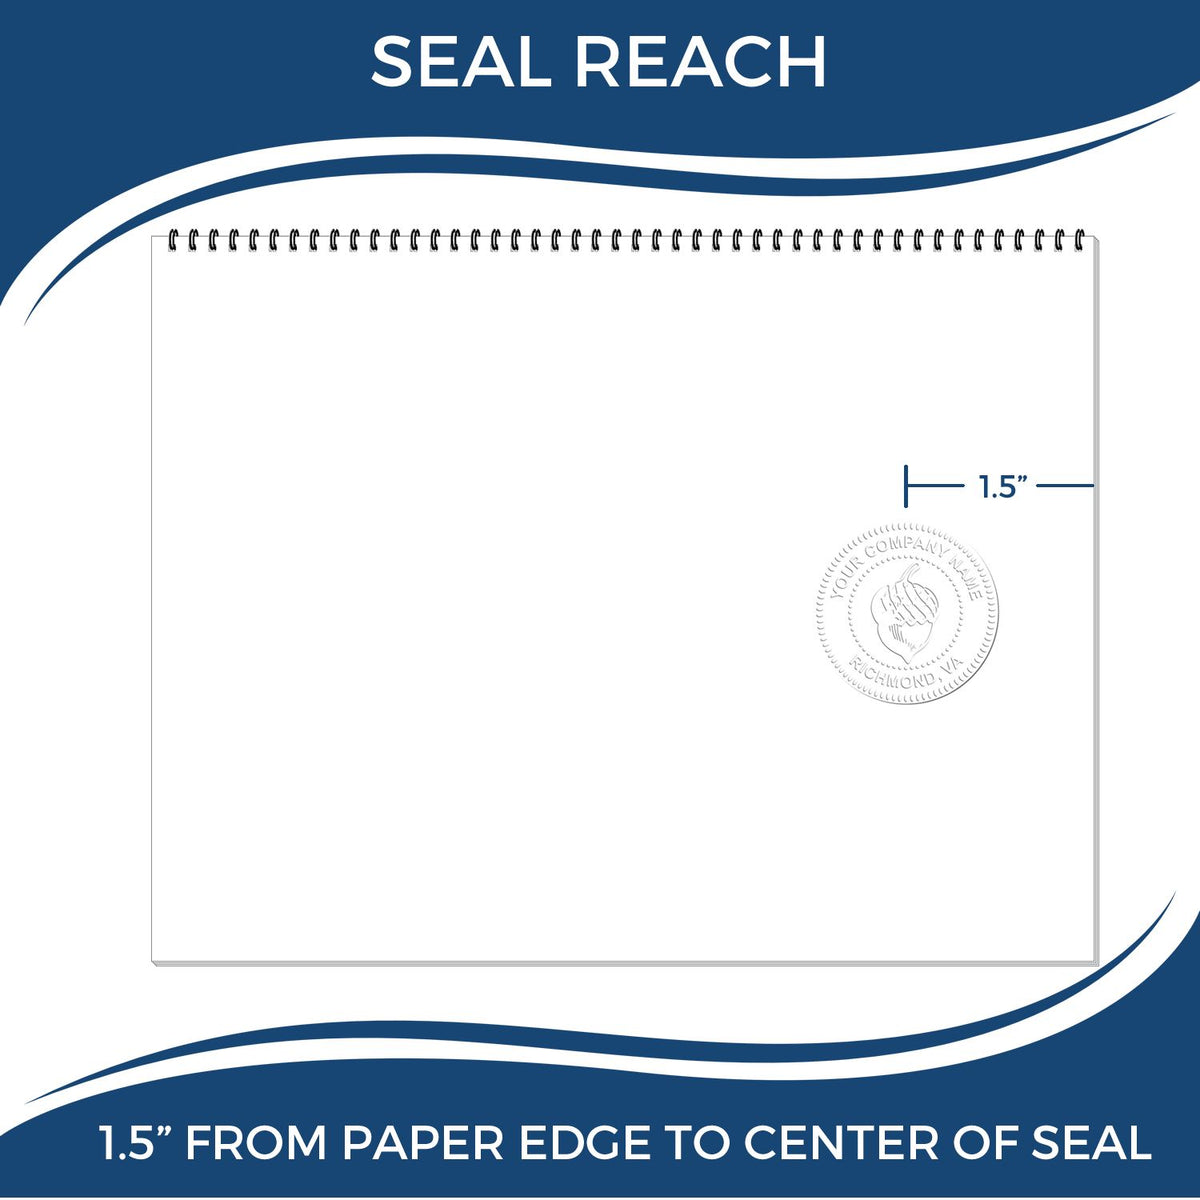 An infographic showing the seal reach which is represented by a ruler and a miniature seal image of the Vermont Desk Architect Embossing Seal